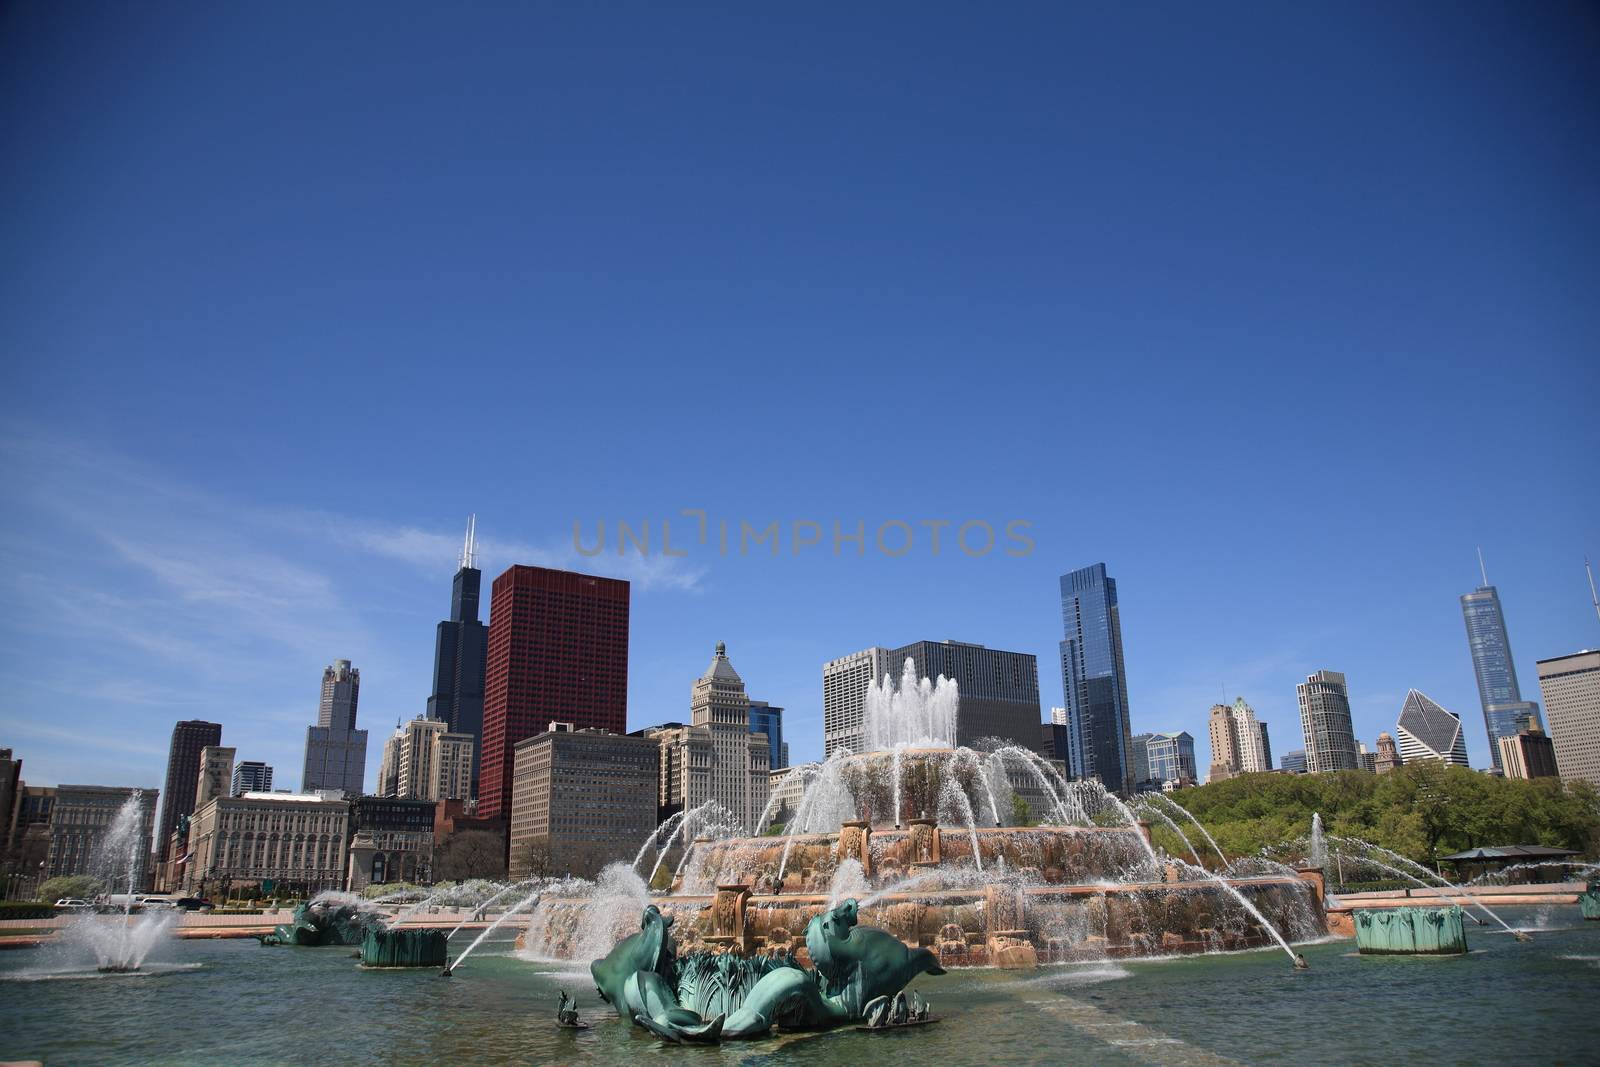 View of Chicago skyscrapers from famous Buckingham Fountain in Grant Park.